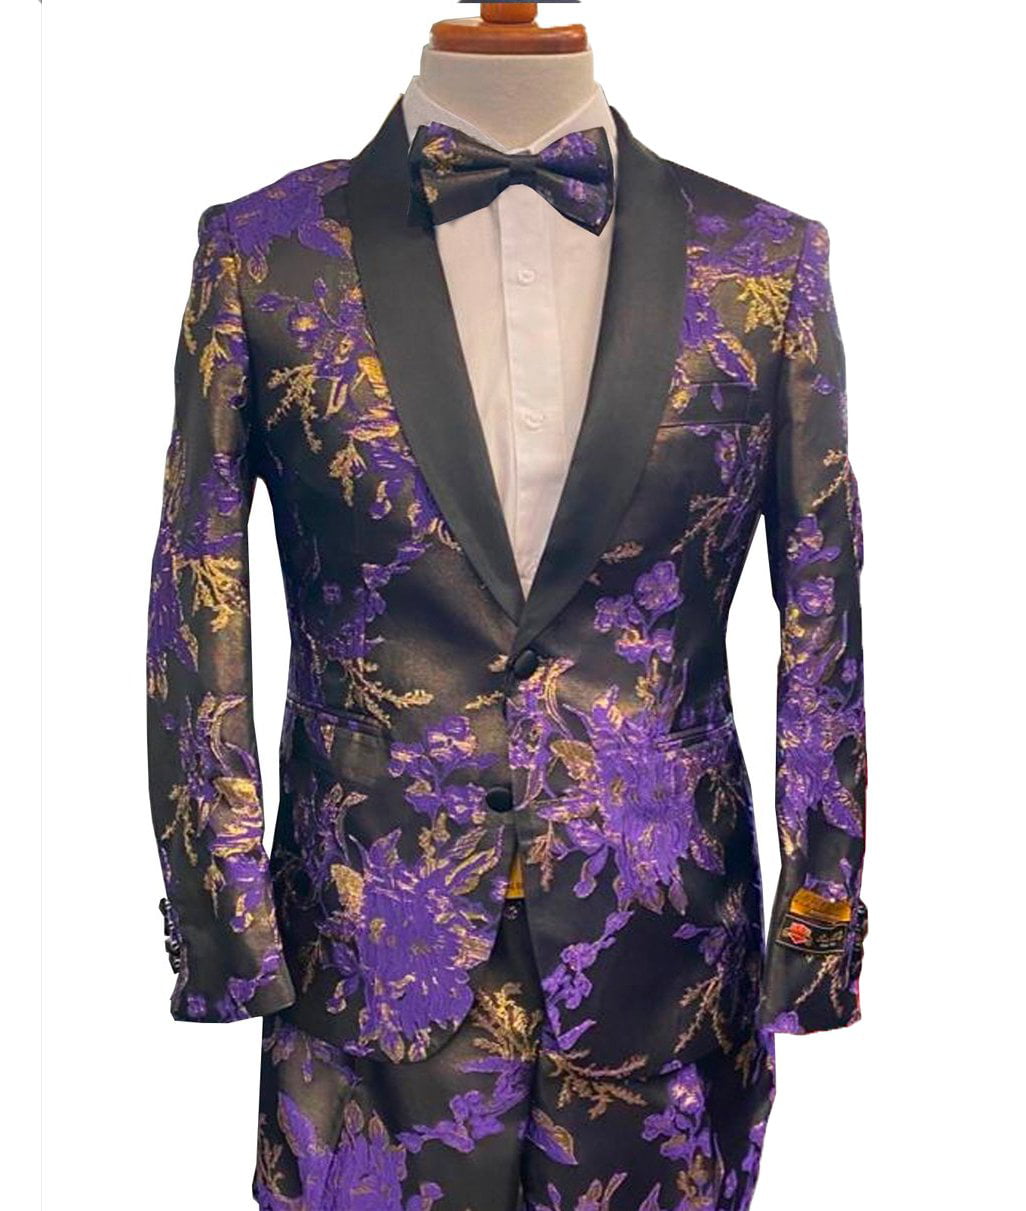 Black and Gold Prom Suit - Floral Paisley Suit - Gold Tuxedo